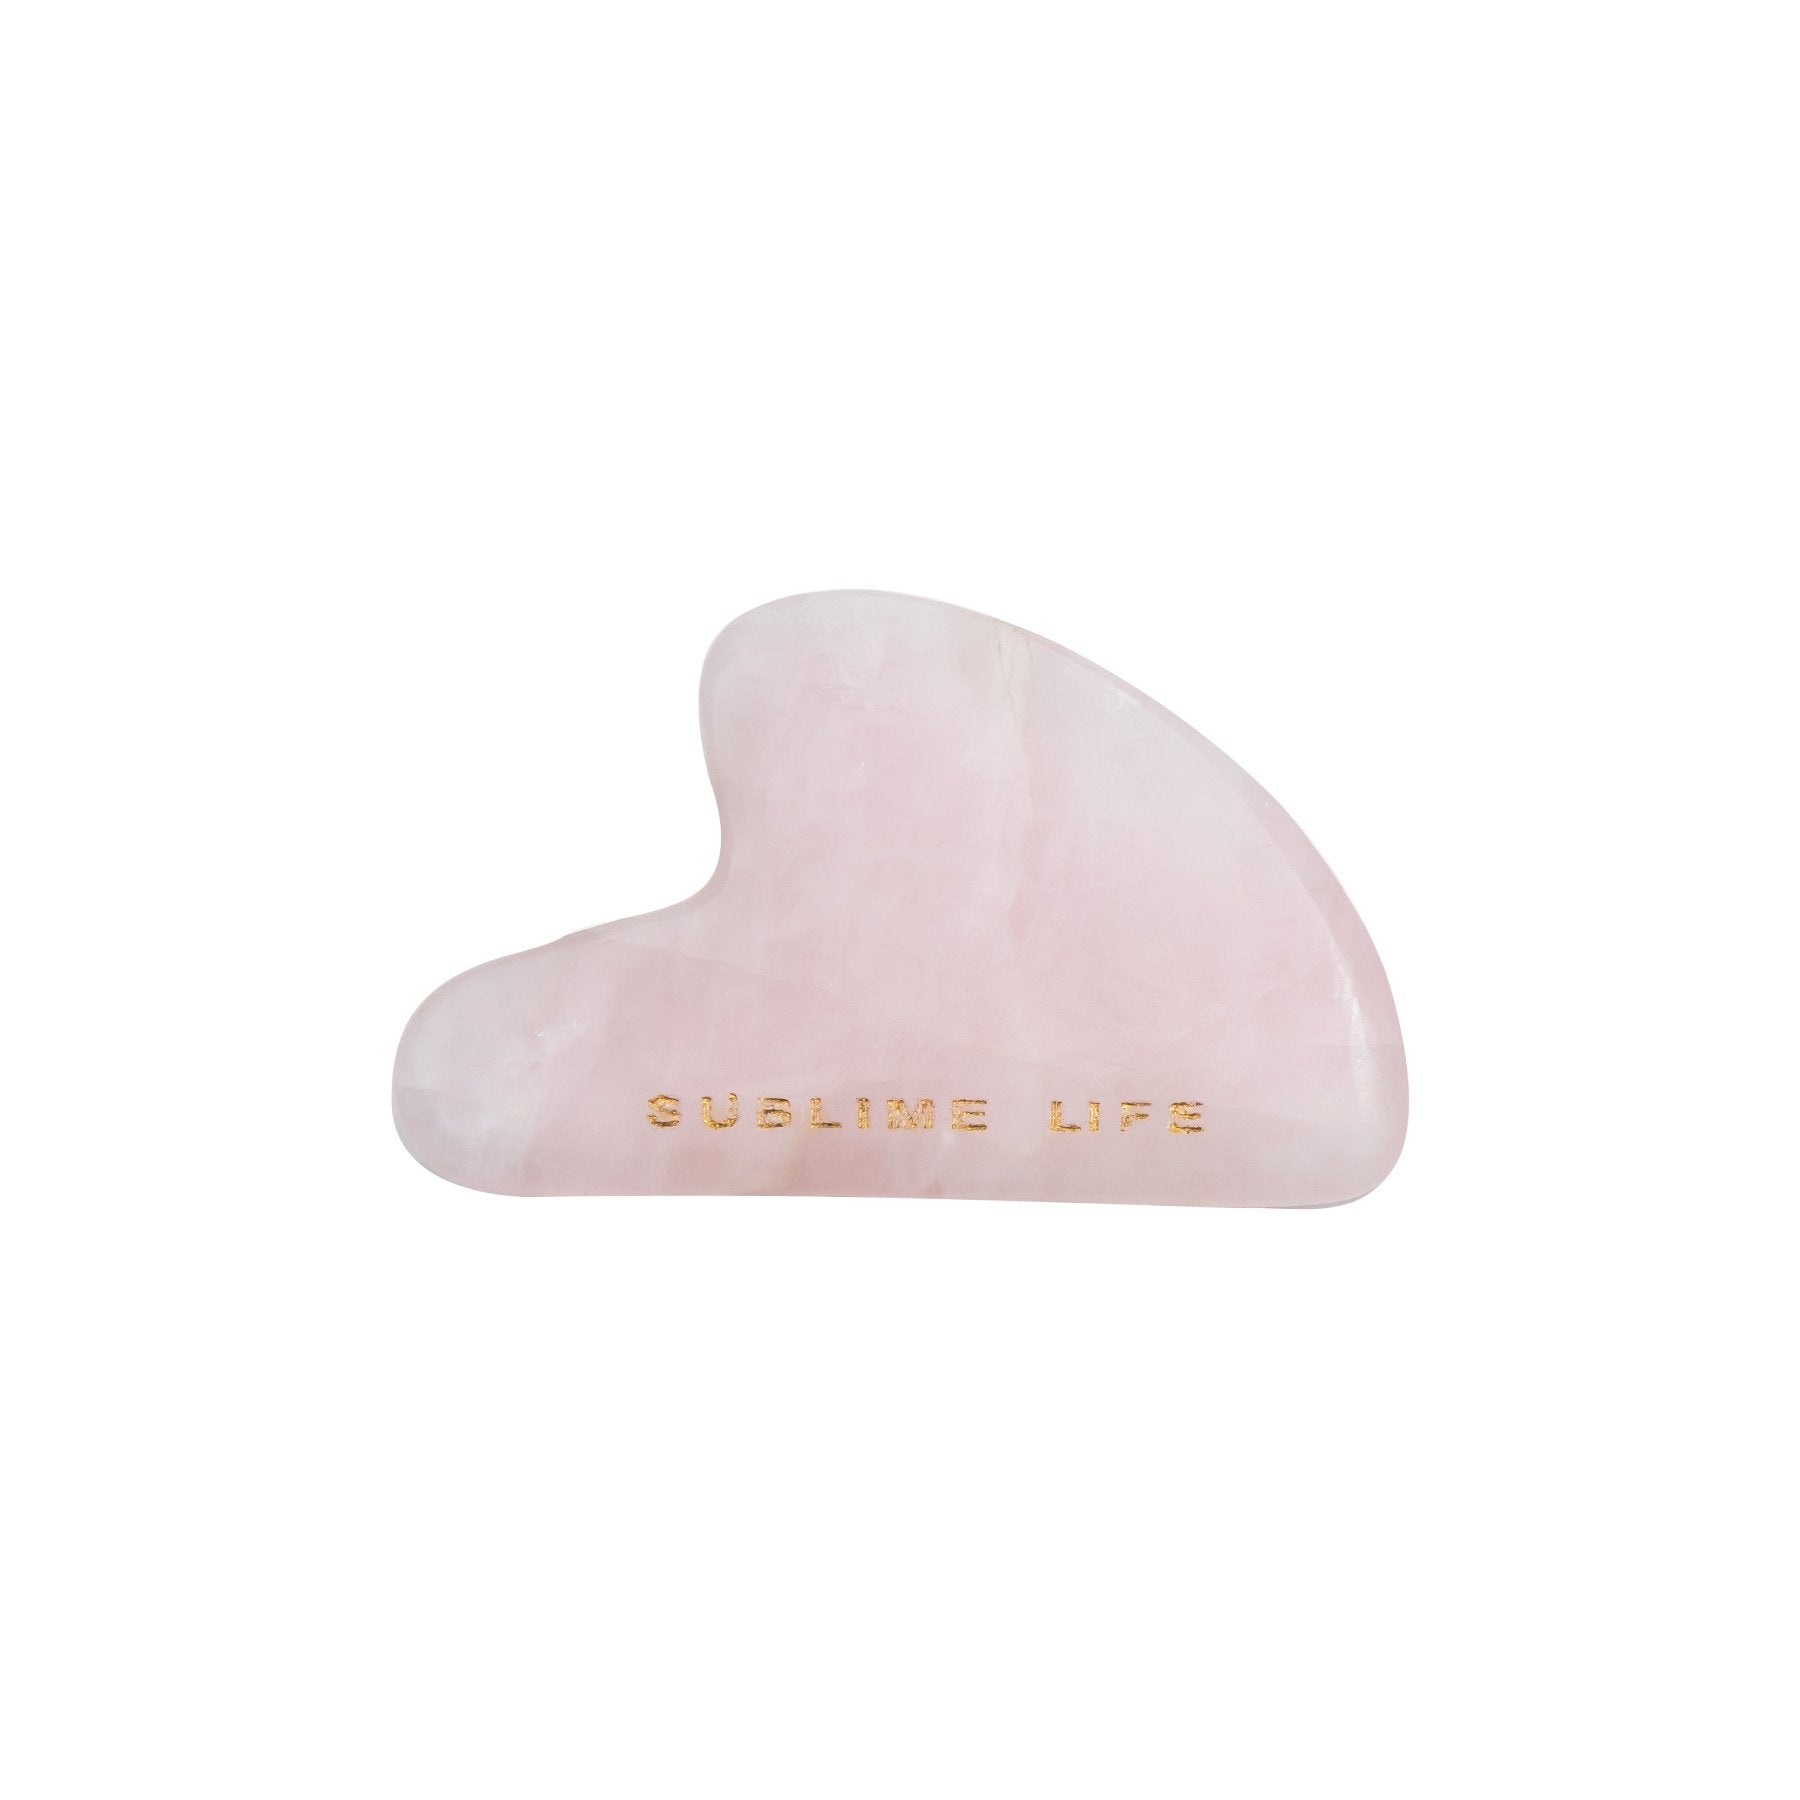 Shop Rose Quartz Gua Sha on SublimeLife.in. Best for reducing puffiness, dark circles, fine lines and pores.